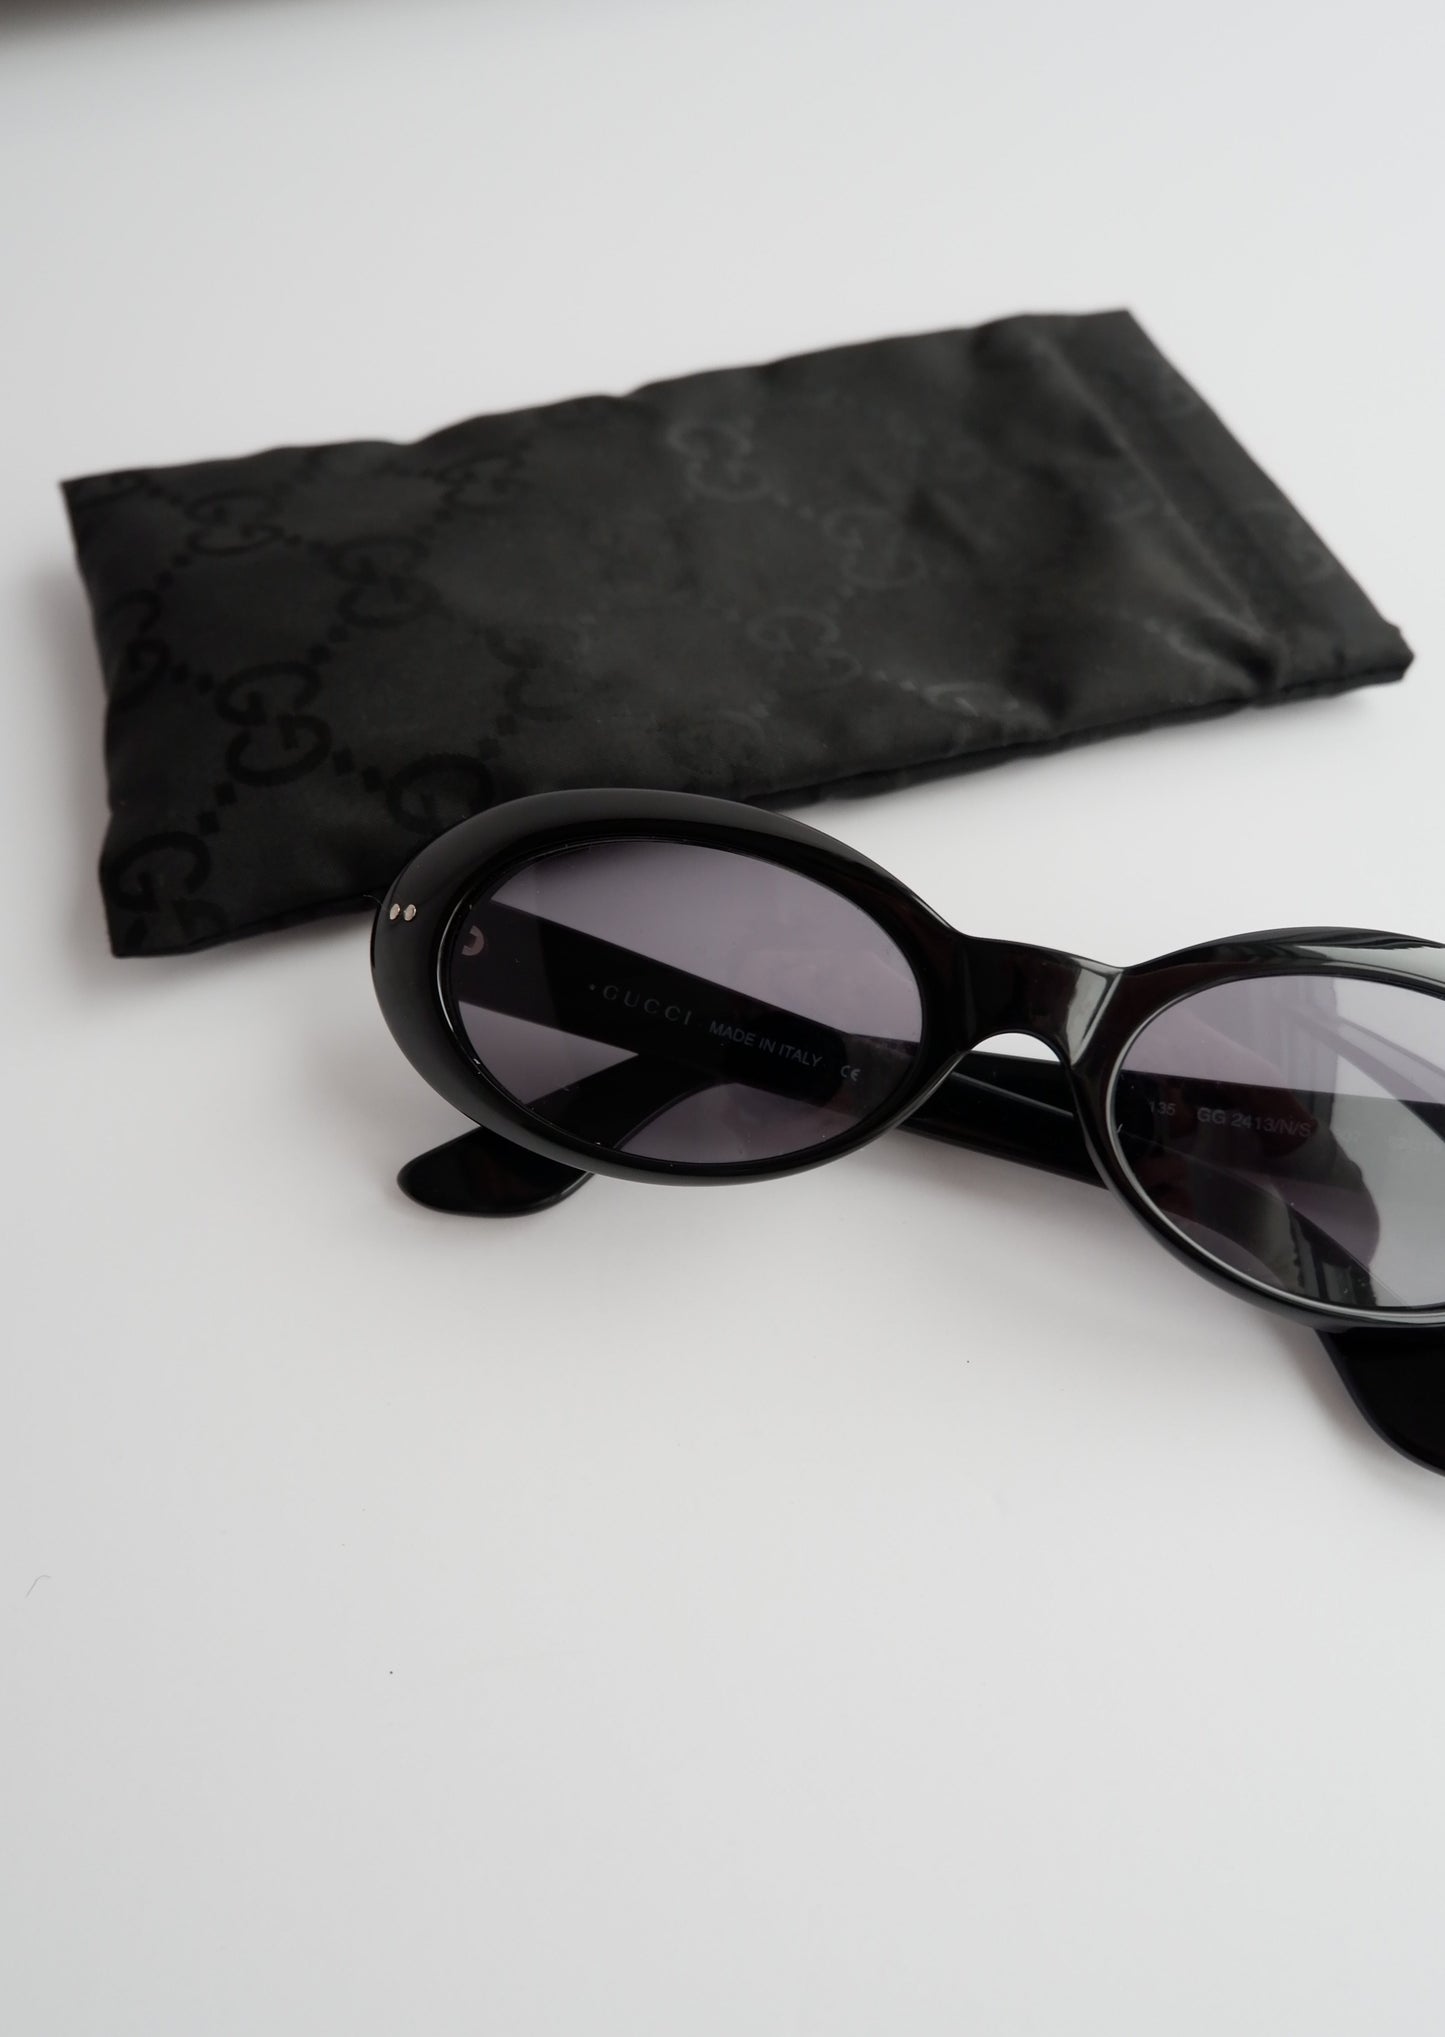 Authentic Preowned Vintage Gucci Black Round Sunglasses